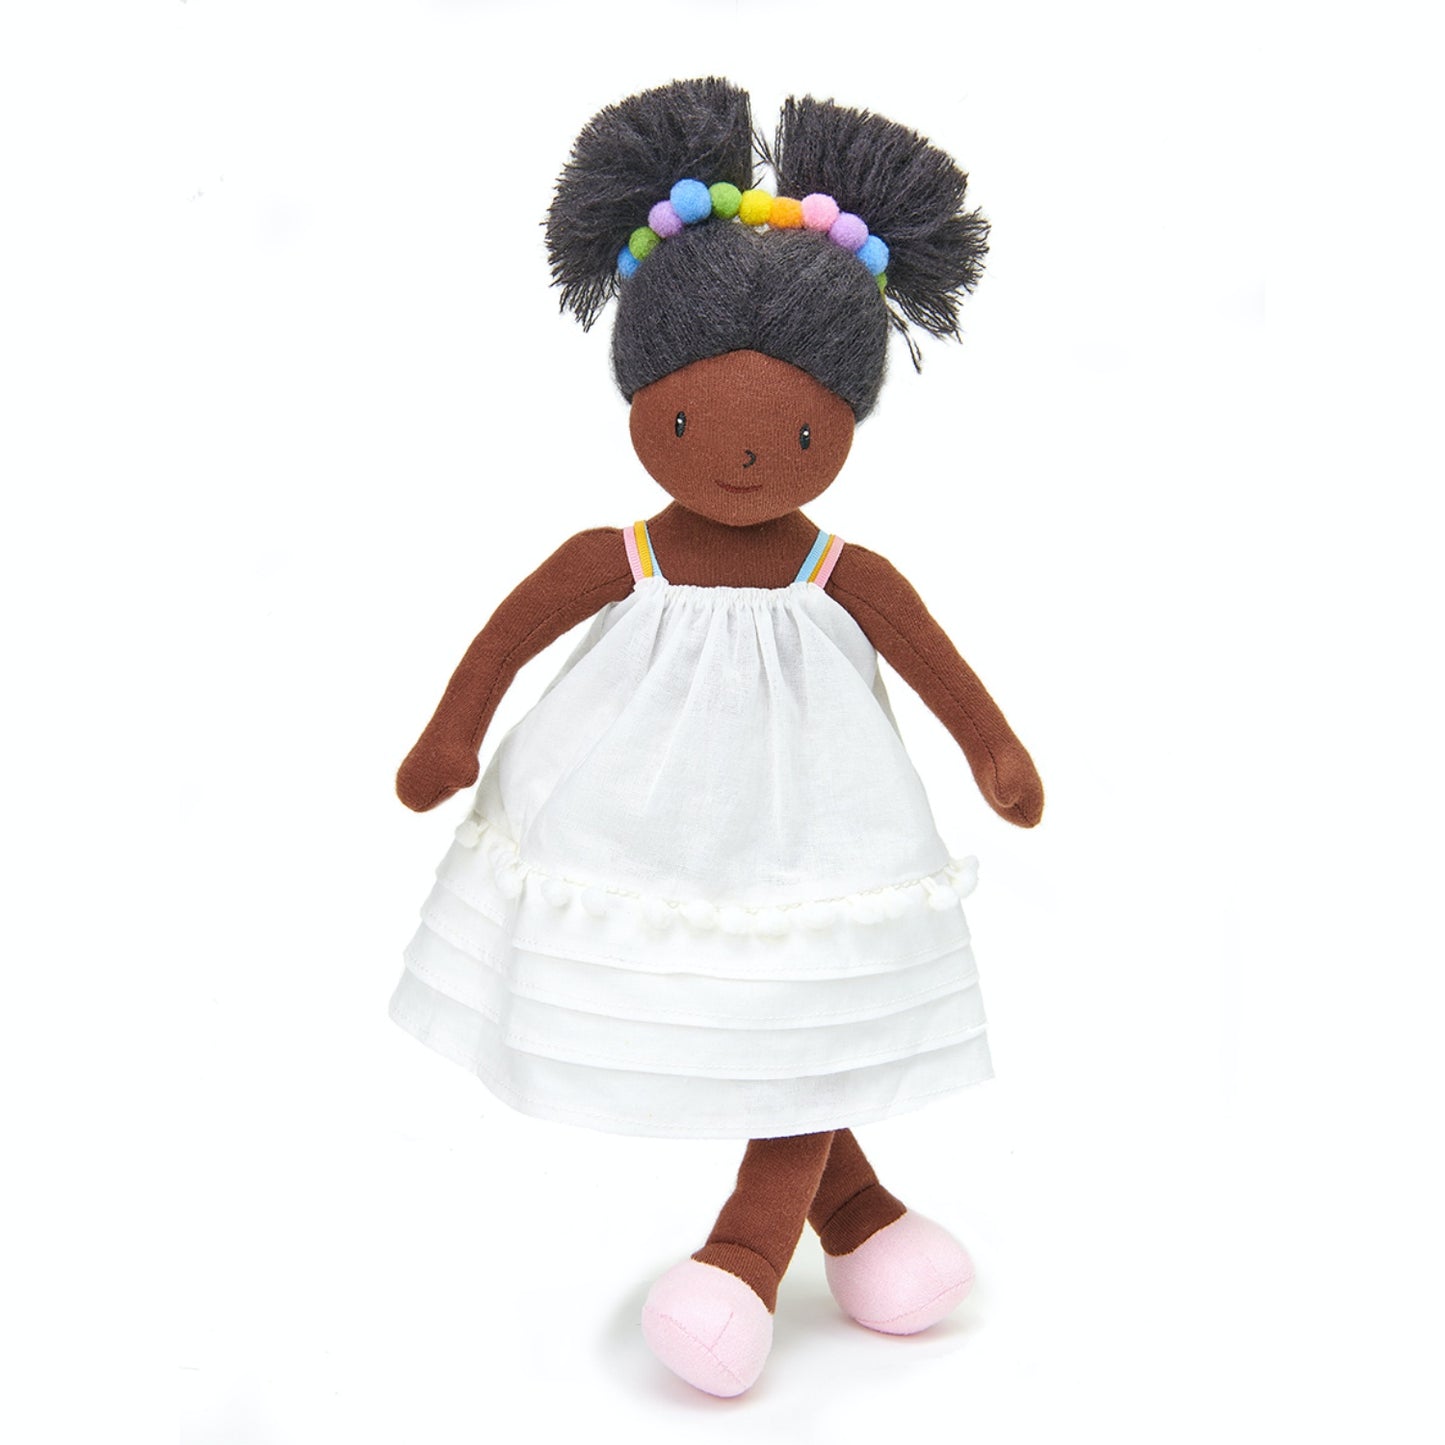 ThreadBear Design Esme Rainbow Rag Doll | Hand-Crafted Rag Doll | Soft Cotton Children’s Doll | Front View – Rag Doll Marty Standing | BeoVERDE.ie